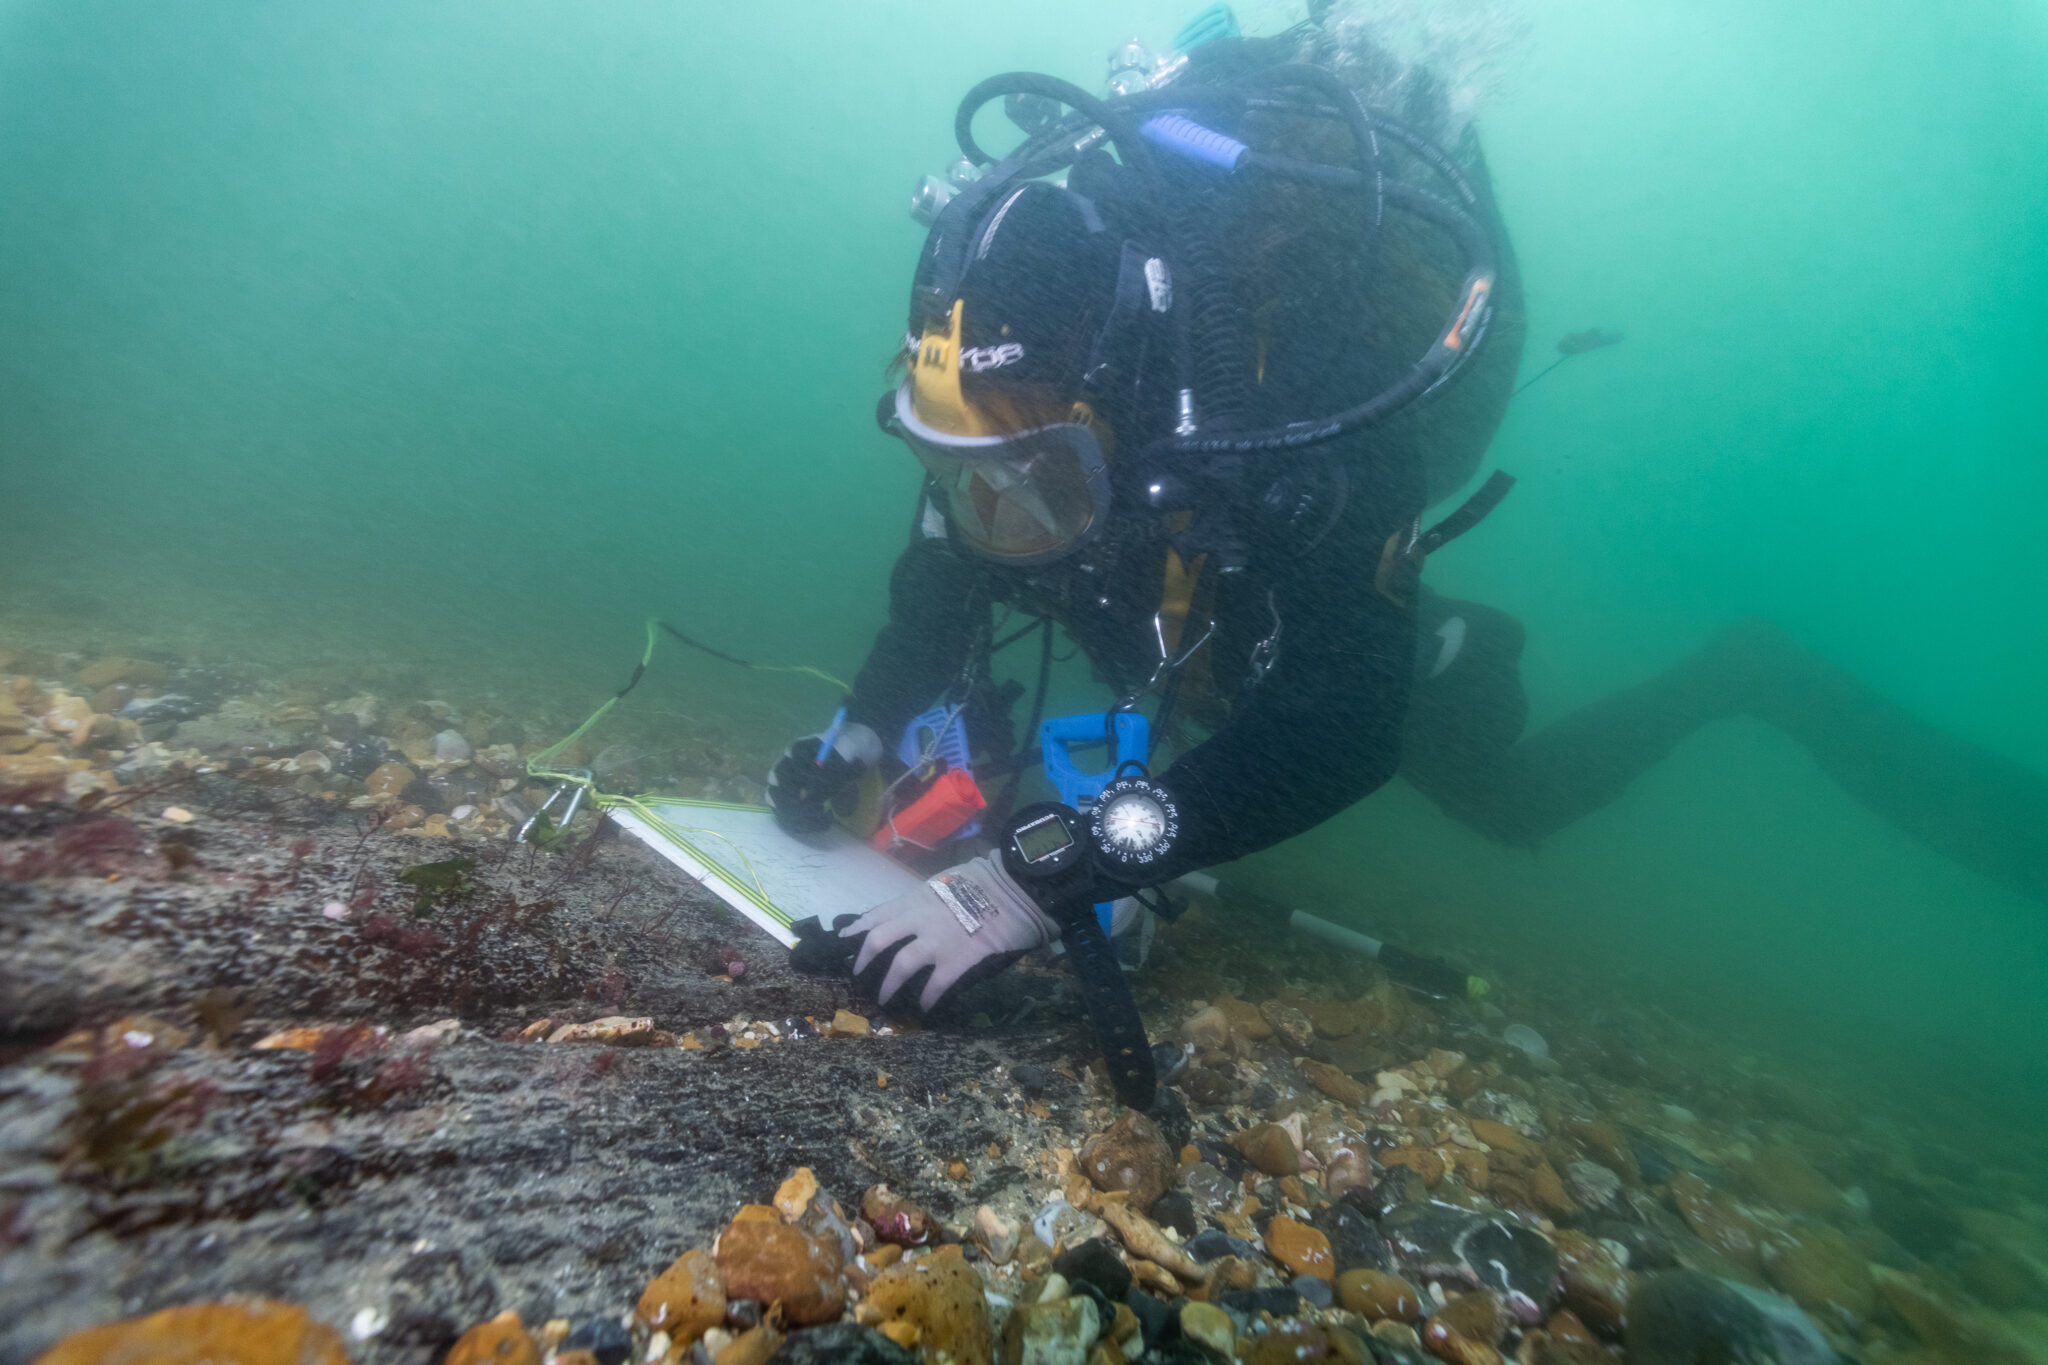 A diver writing on a slate underwater